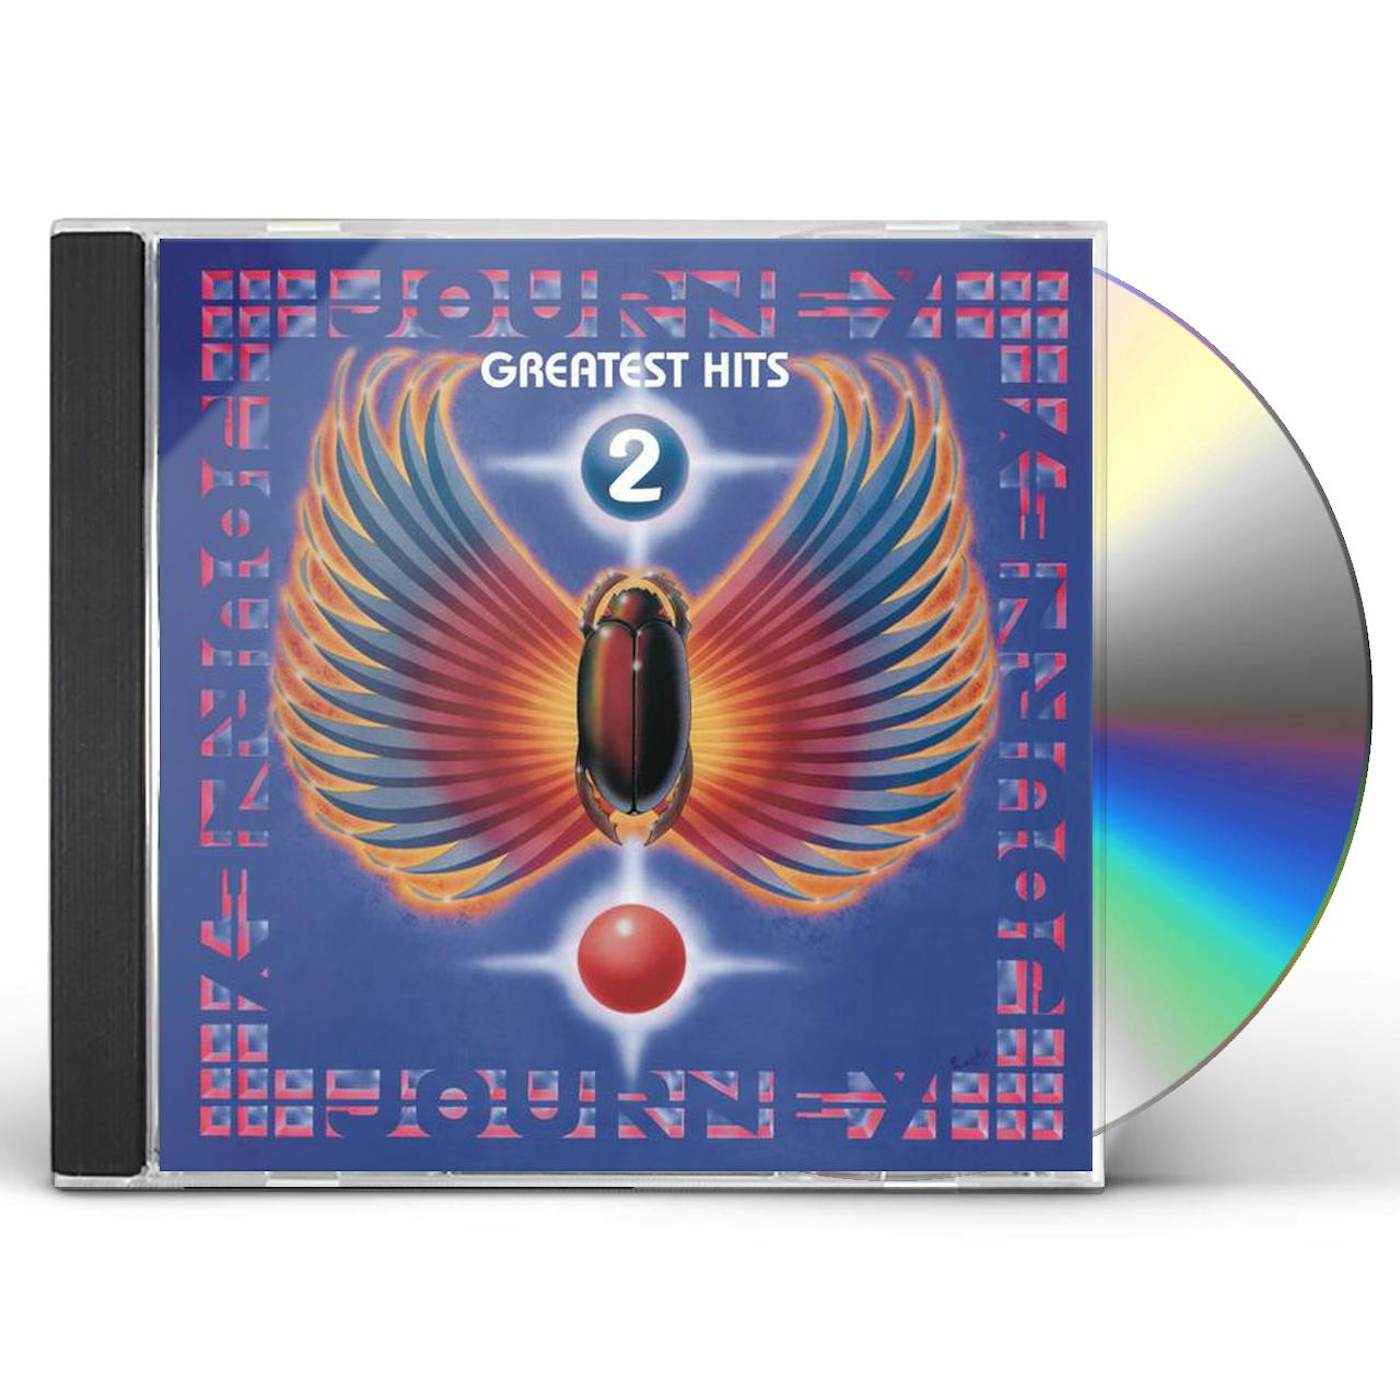 JOURNEY'S GREATEST HITS VOL.2 CD